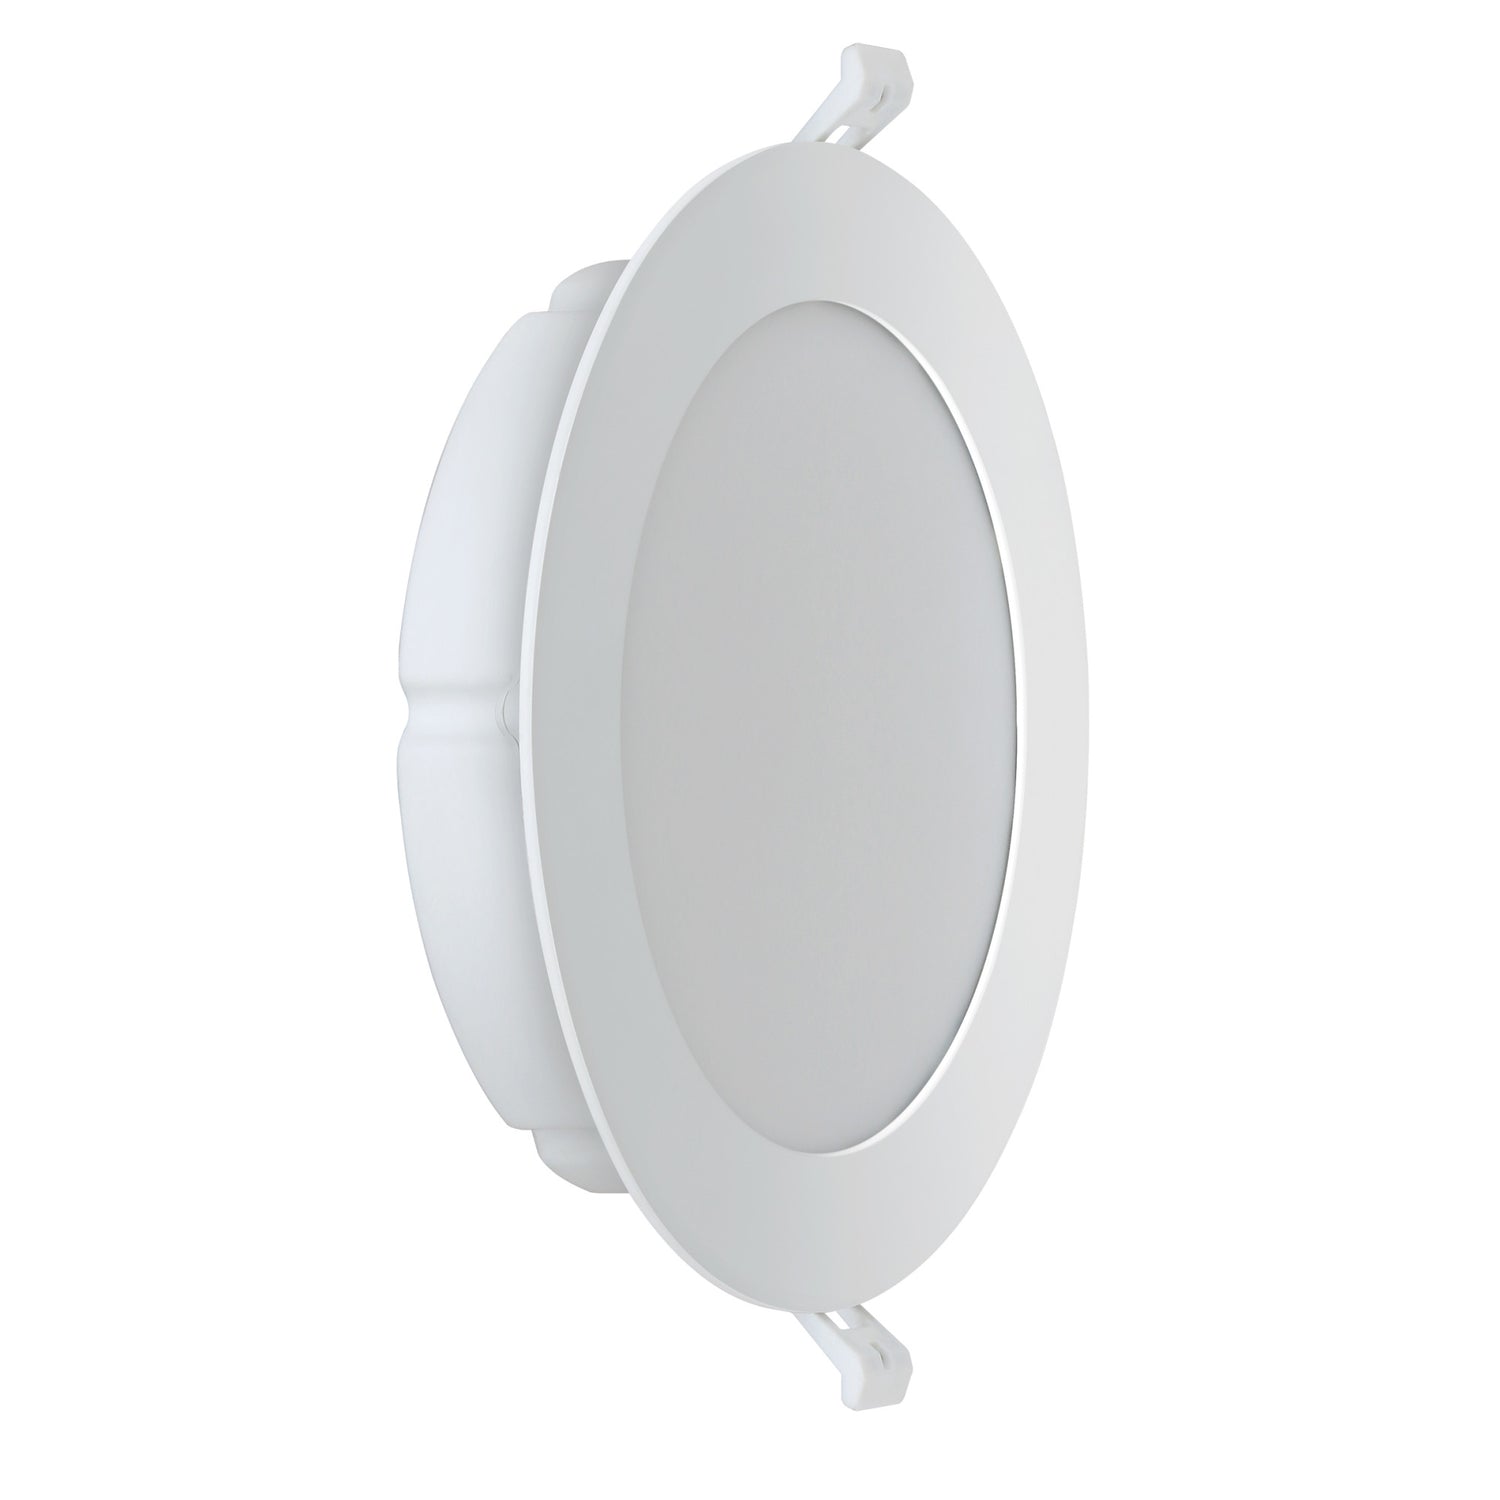 6 in. 15W (65W Replacement) Tethered J-Box Smart Canless LED Downlight